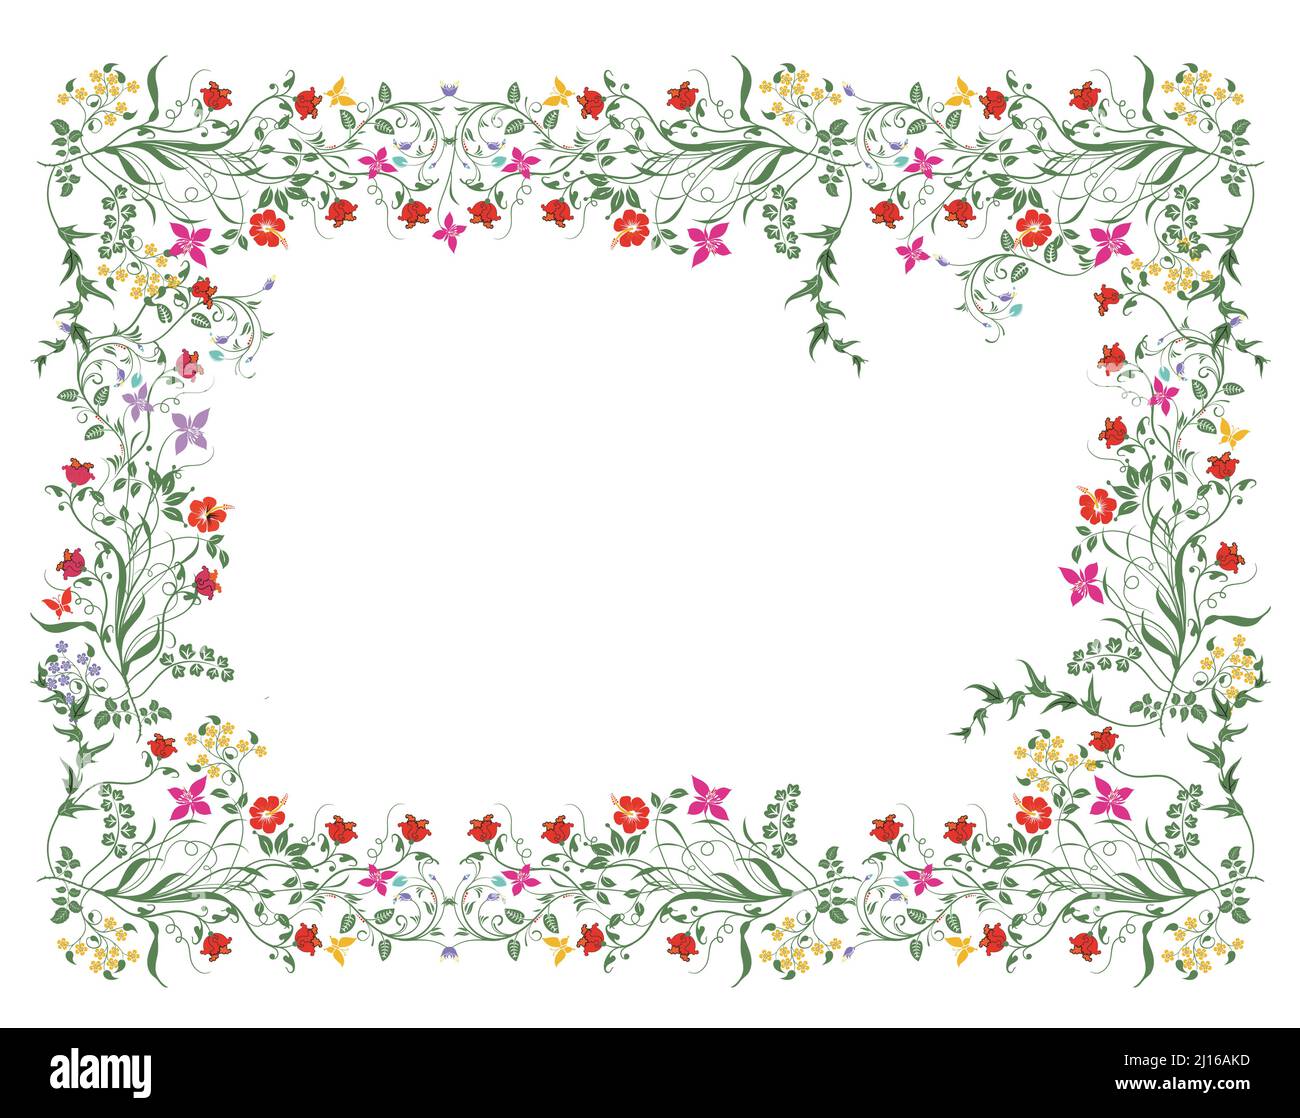 flowers and plants border, isolated illustration, Stock Vector